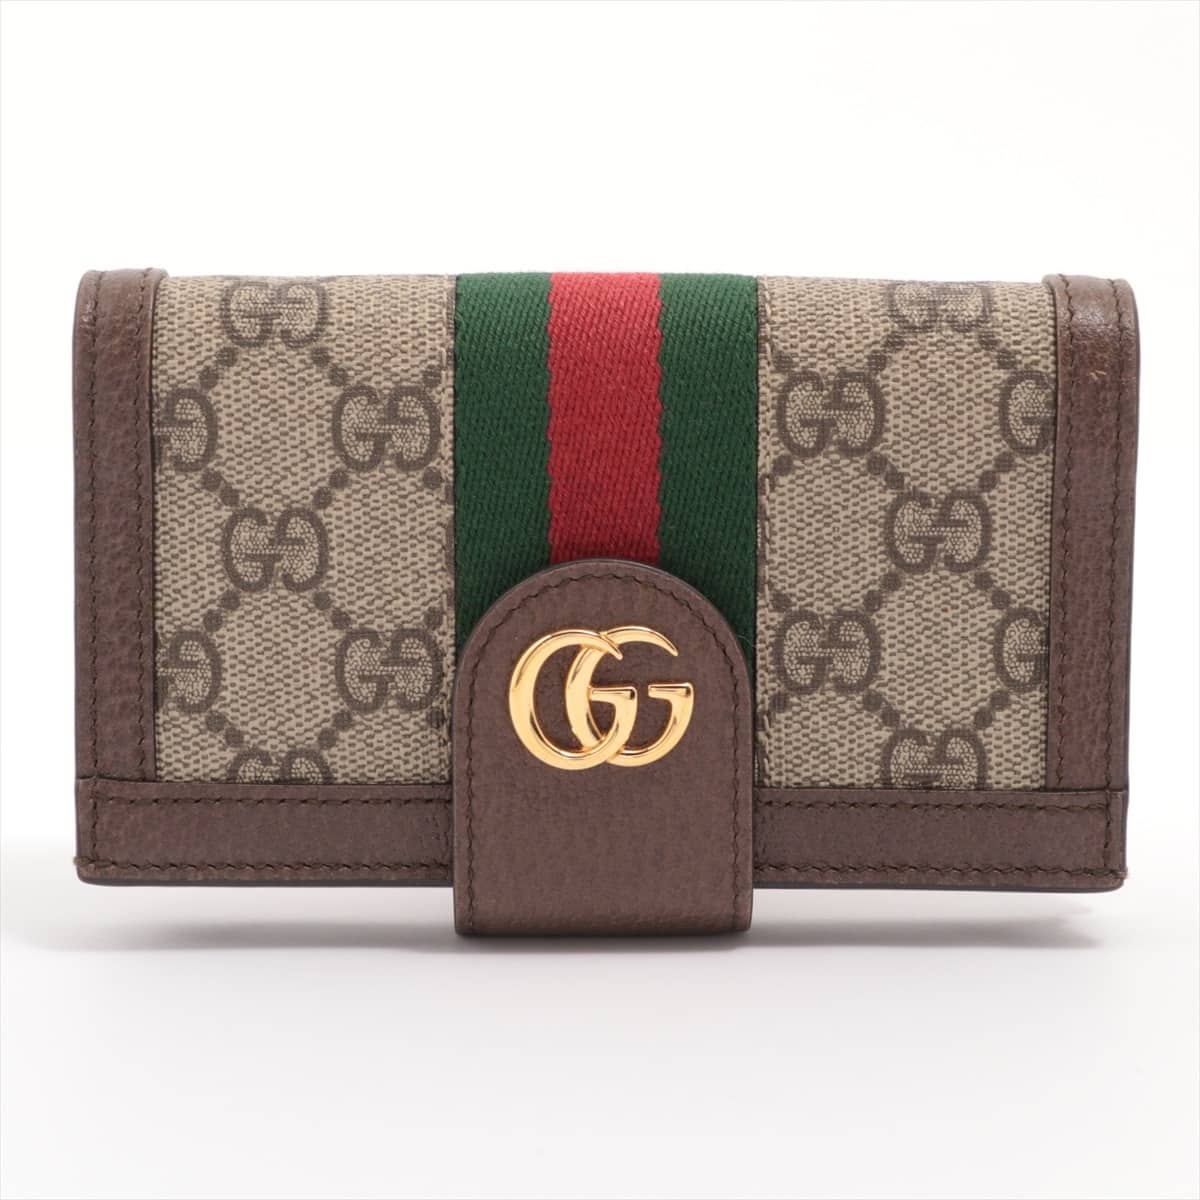 Gucci GG Marmont 523163 PVC×canvas Mobile phone case Beige Chain included